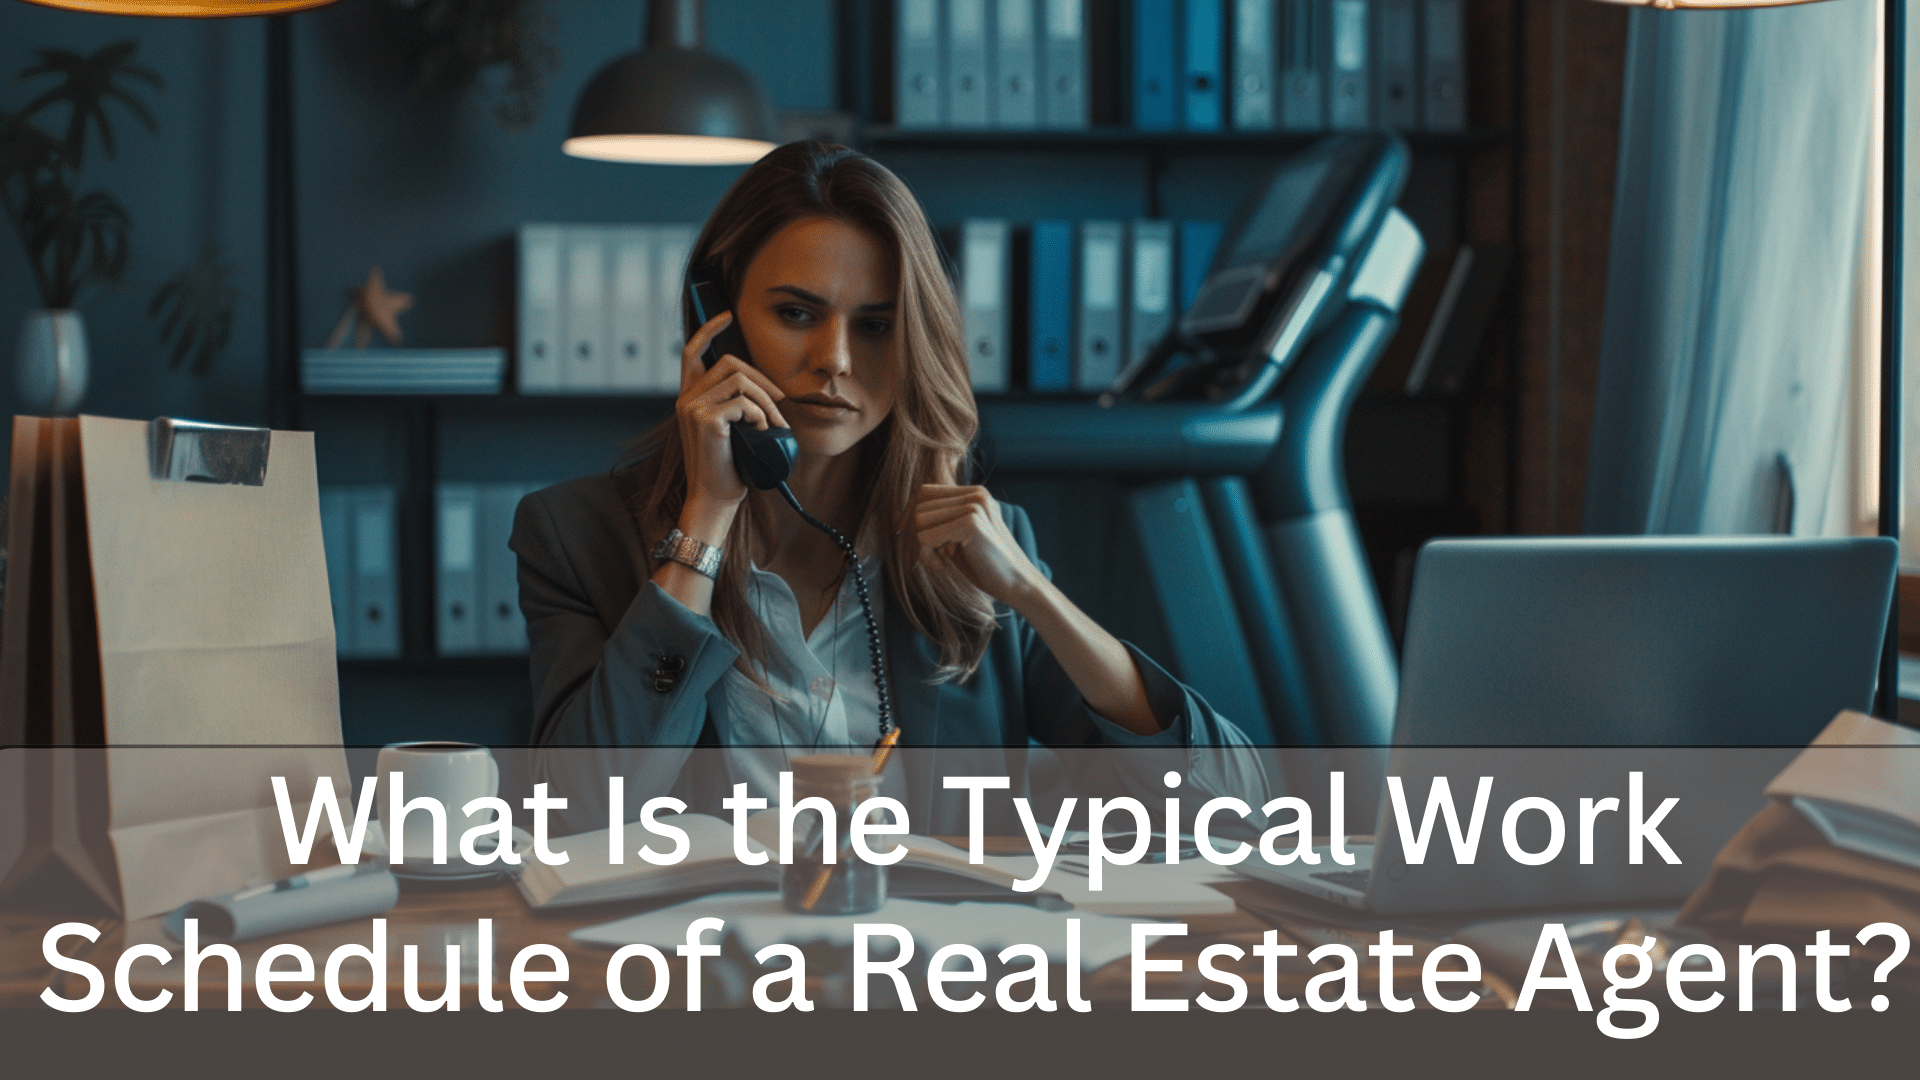 What Is the Typical Work Schedule for a Real Estate Agent